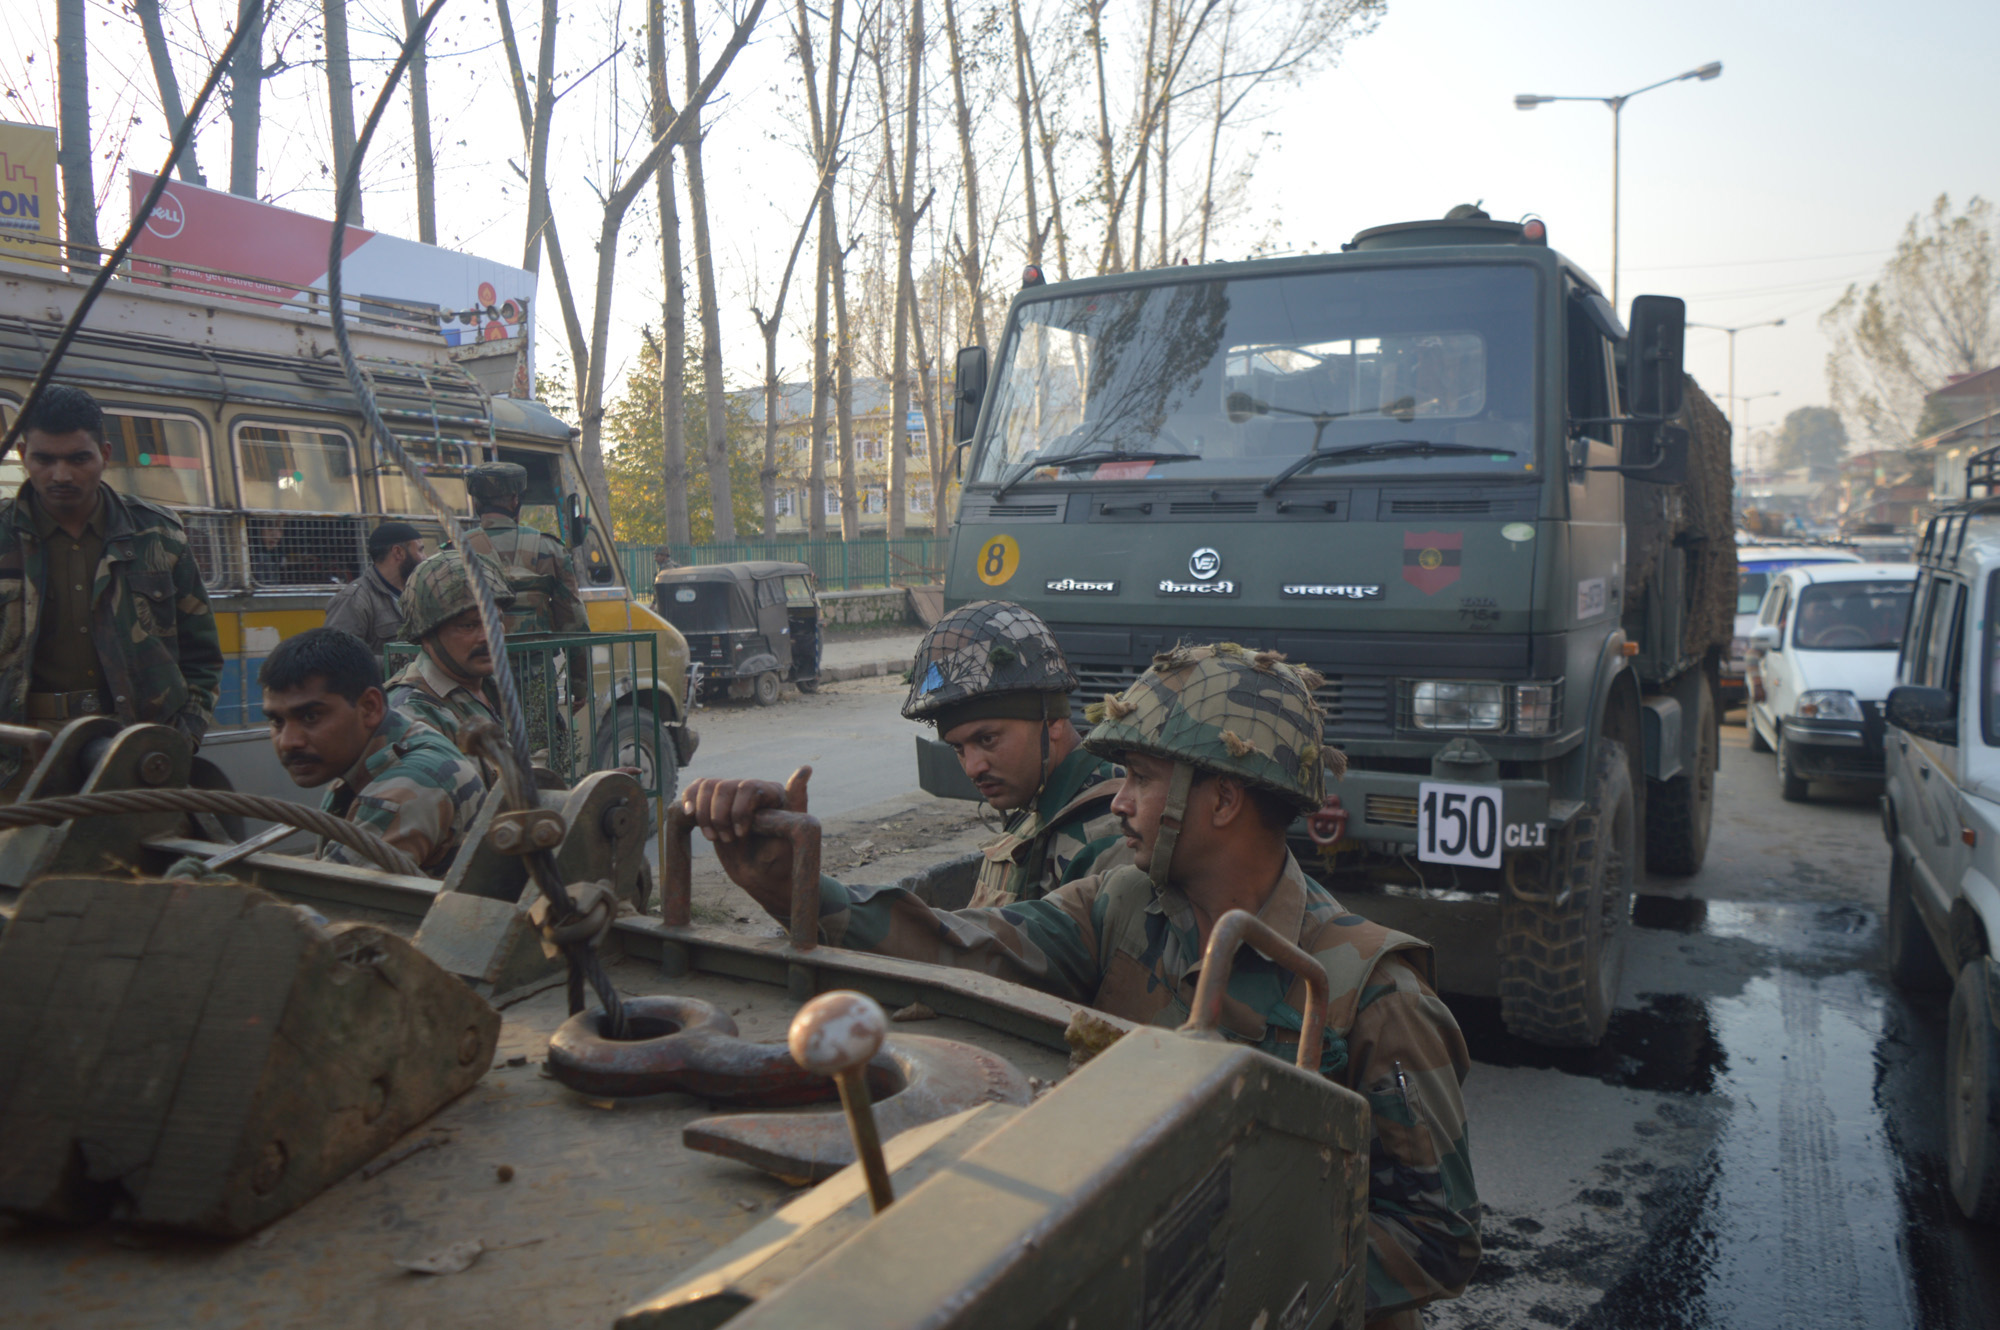 An Army vehicle attacked by the militants at Ganjiwara in Anantnag on Saturday. —Excelsior/Younis Khaliq